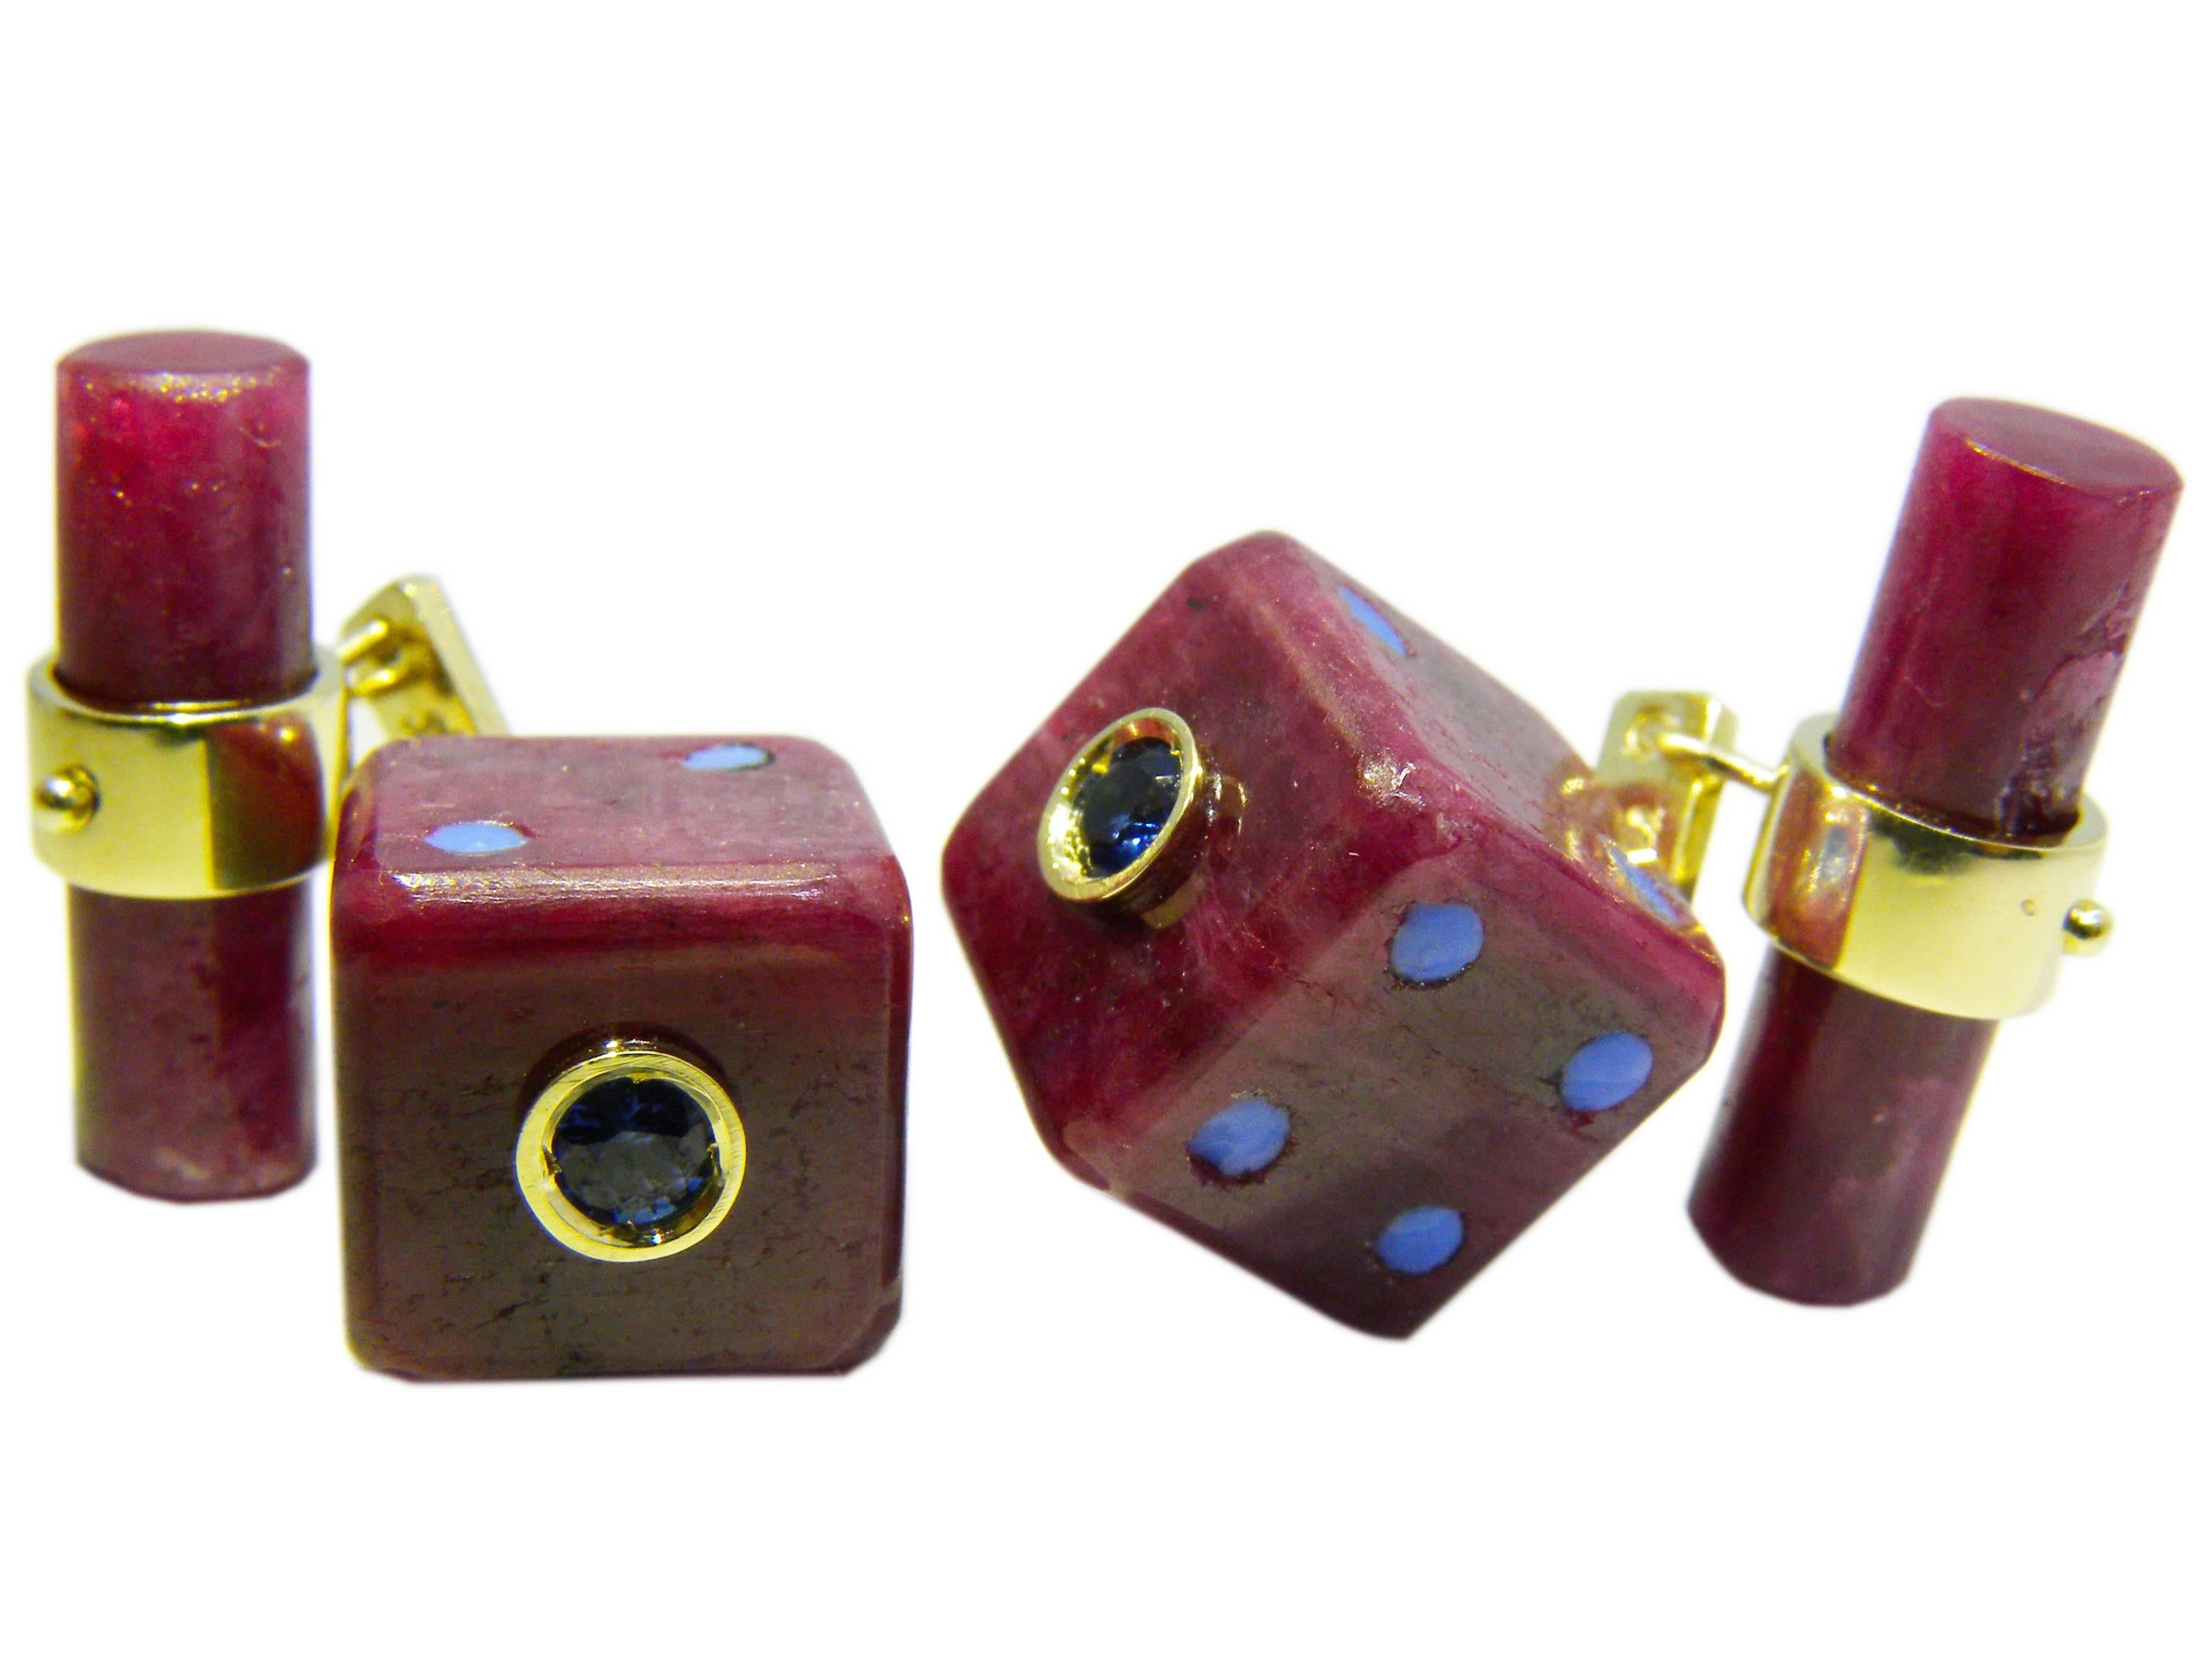 One-of-a-kind 48 Carat Hand Inlaid Natural Ruby Dice Shaped Cufflinks, Hand Enamelled Blue Dots, 0.24 Carat Round Blue Sapphires, Yellow Gold Setting